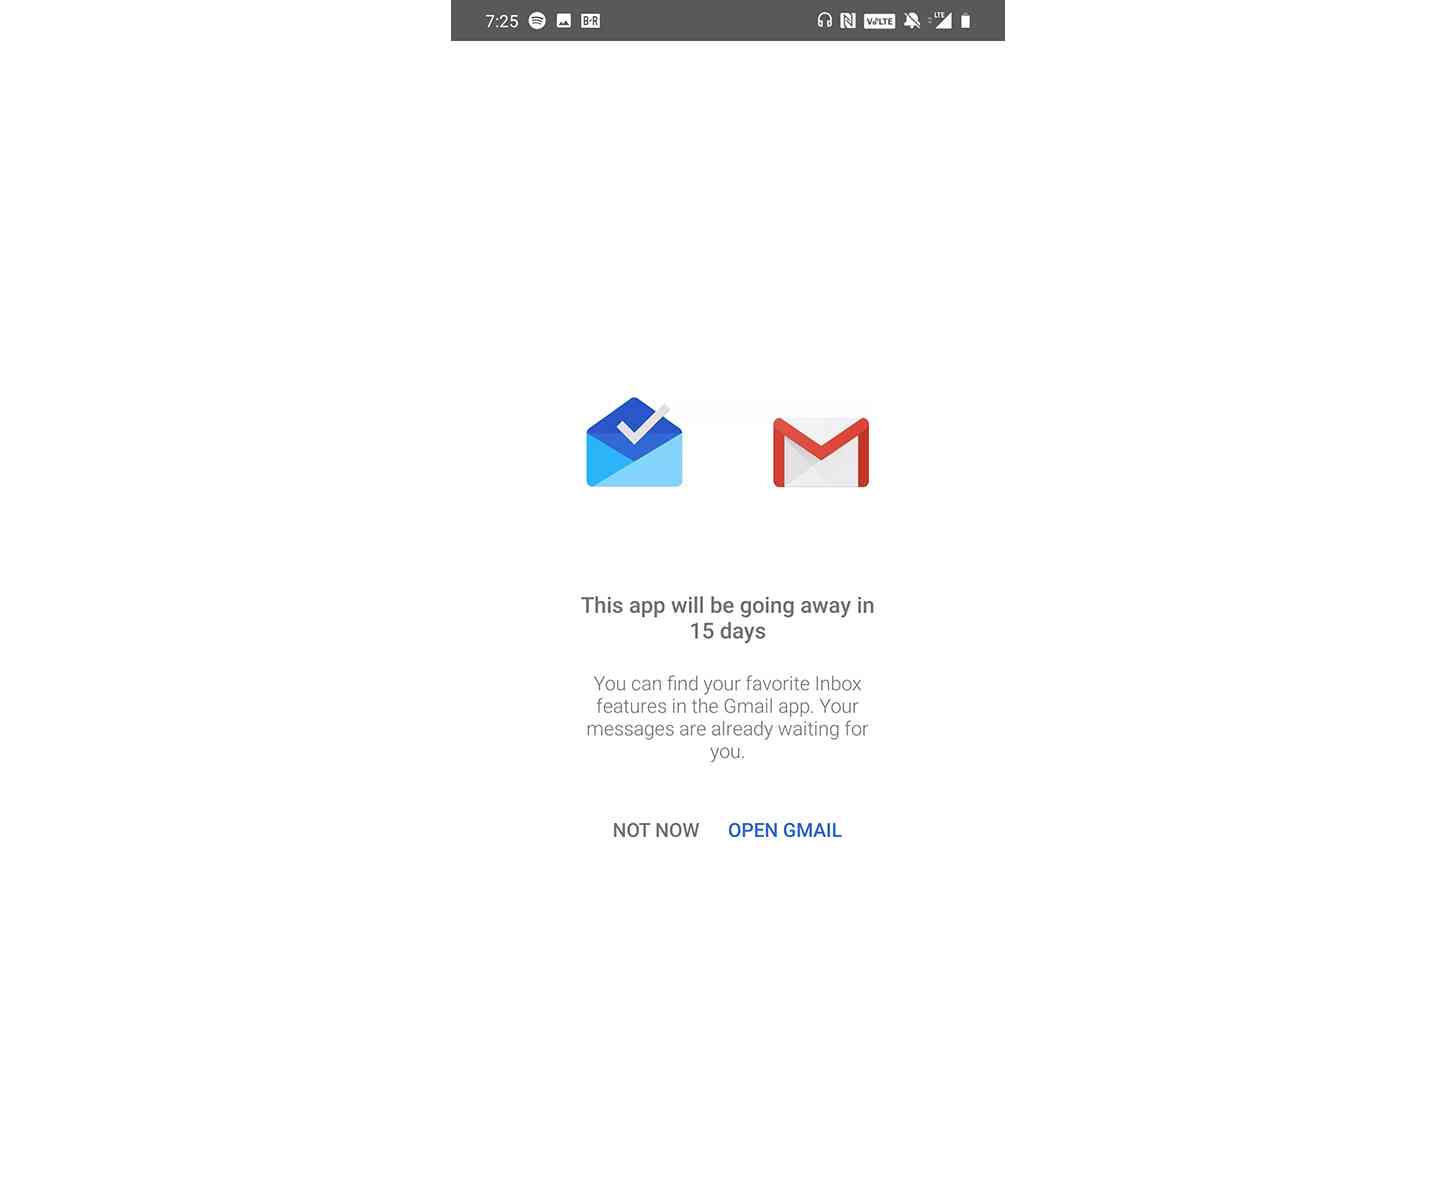 Stopping the Inbox by Gmail